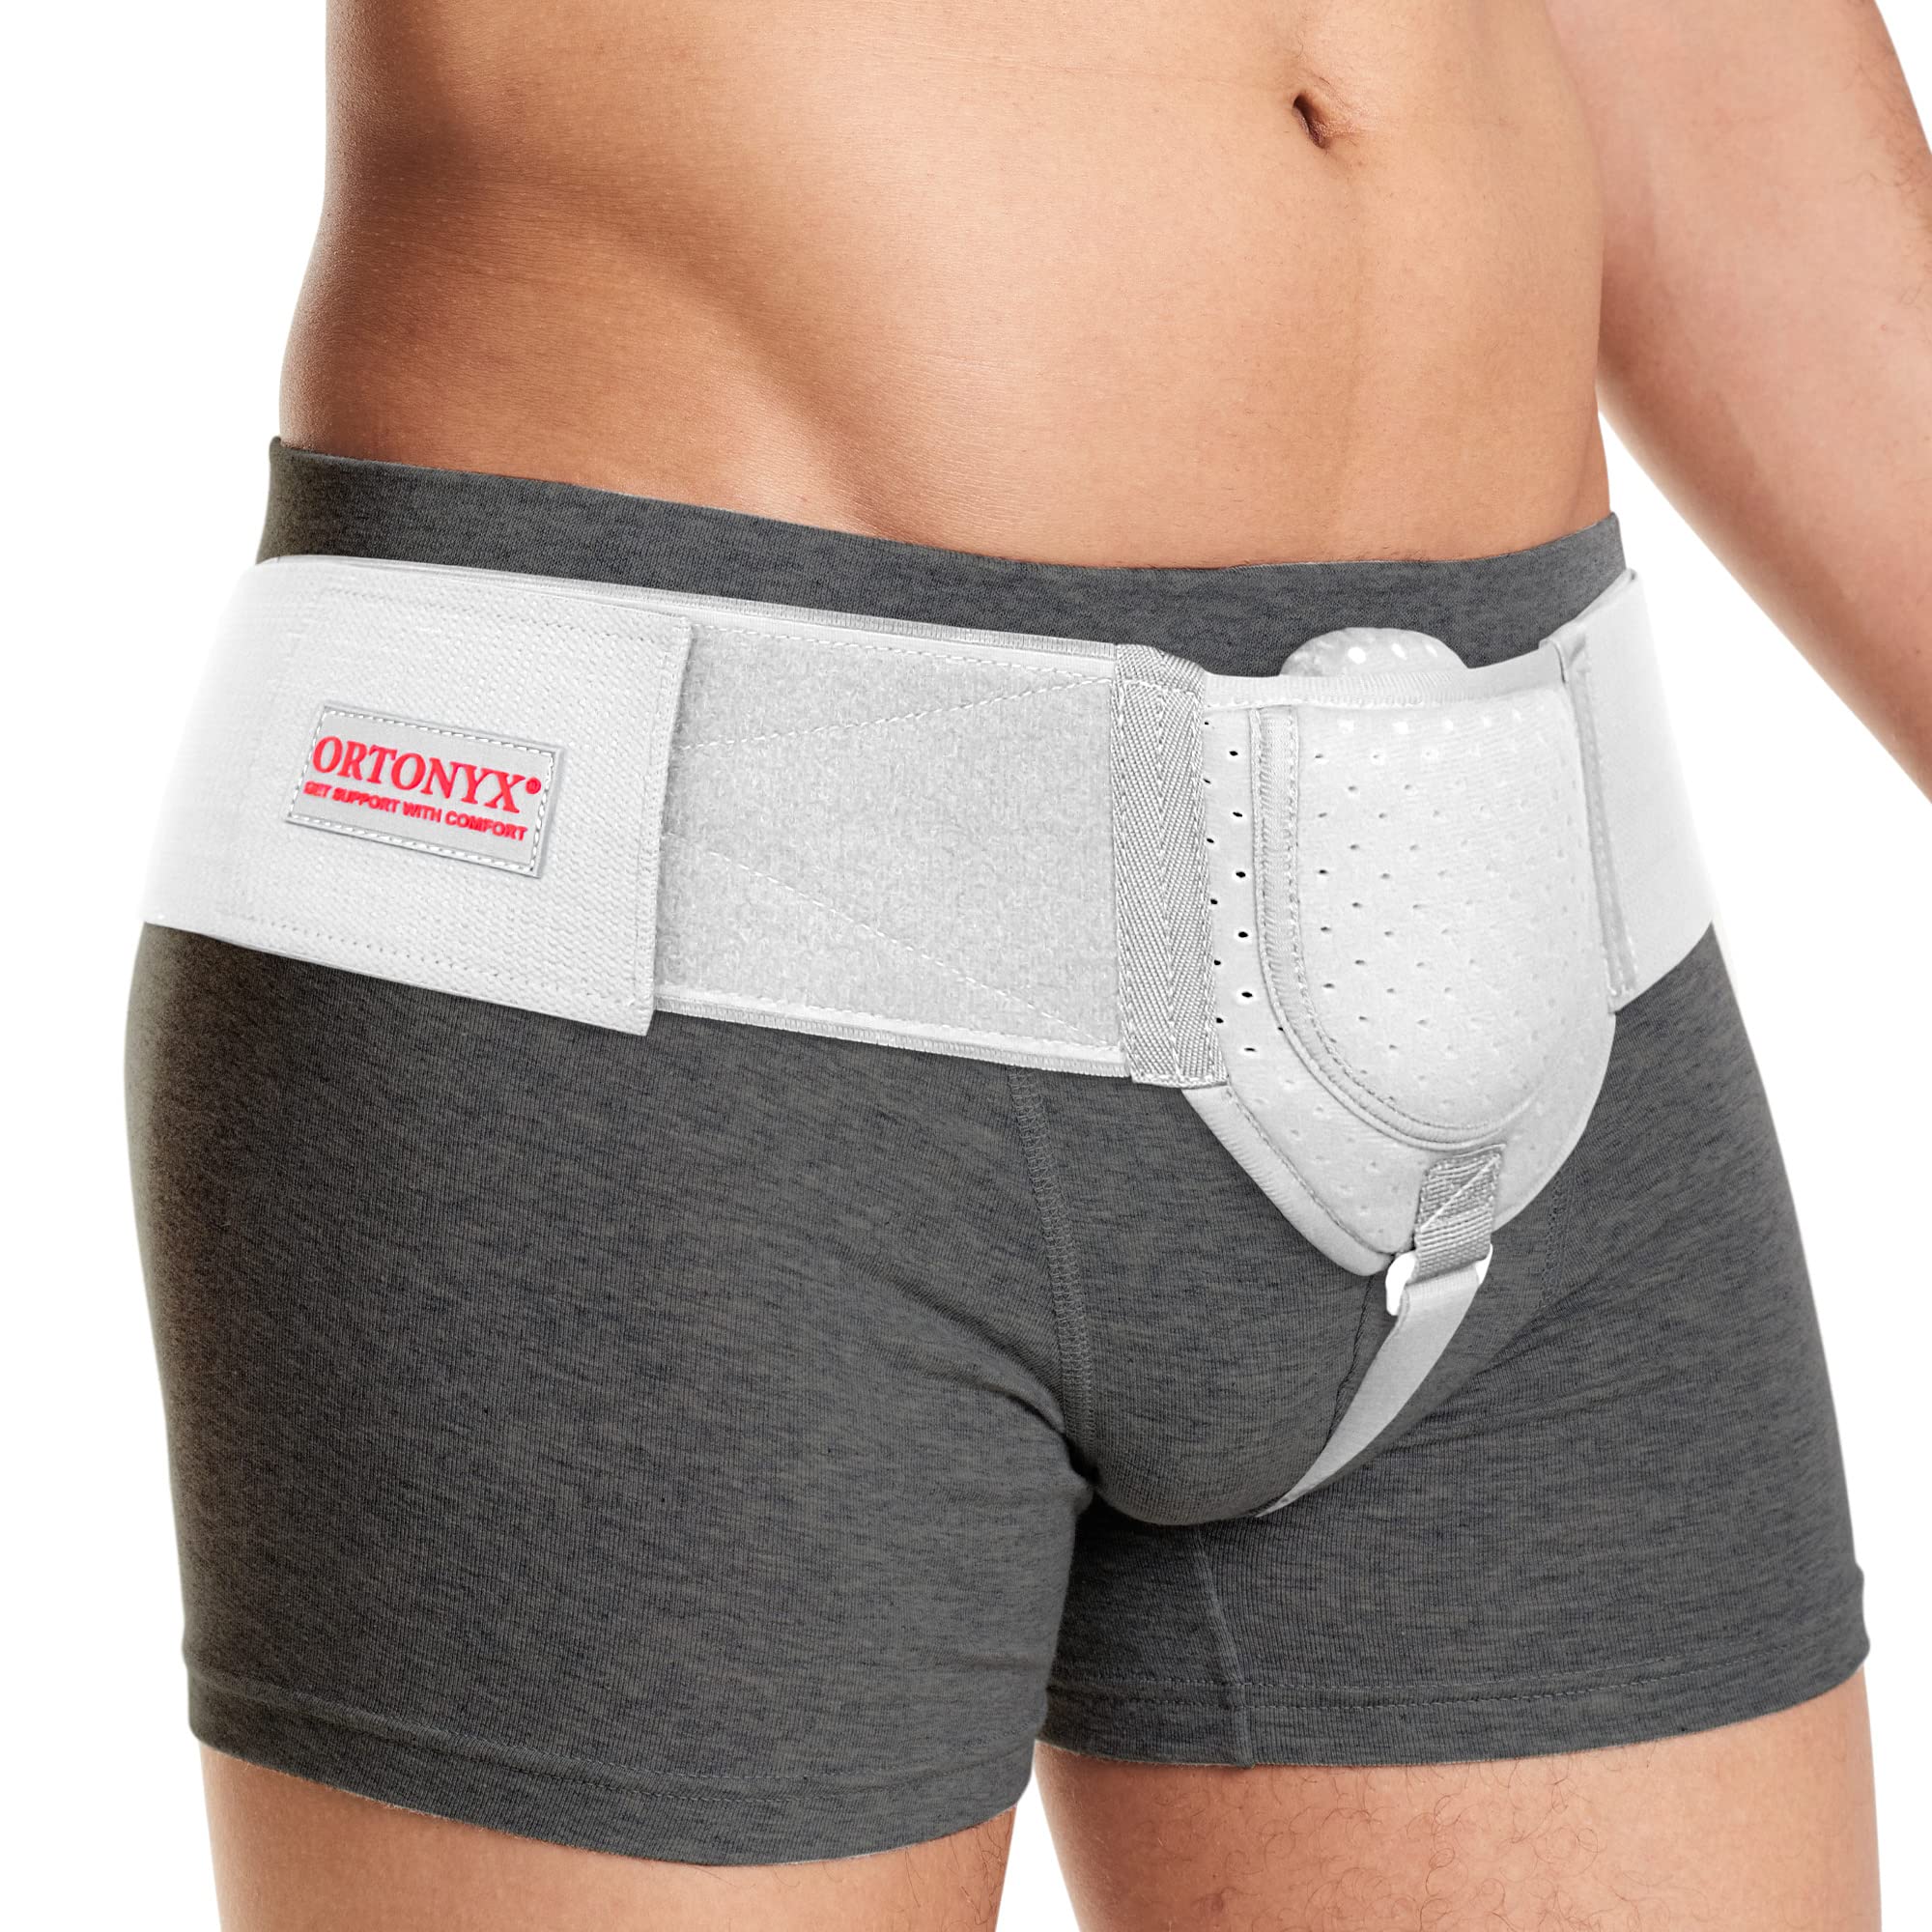 Ortonyx Inguinal Groin Hernia Belt For Men And Women With Removable Compression Pad And 6594